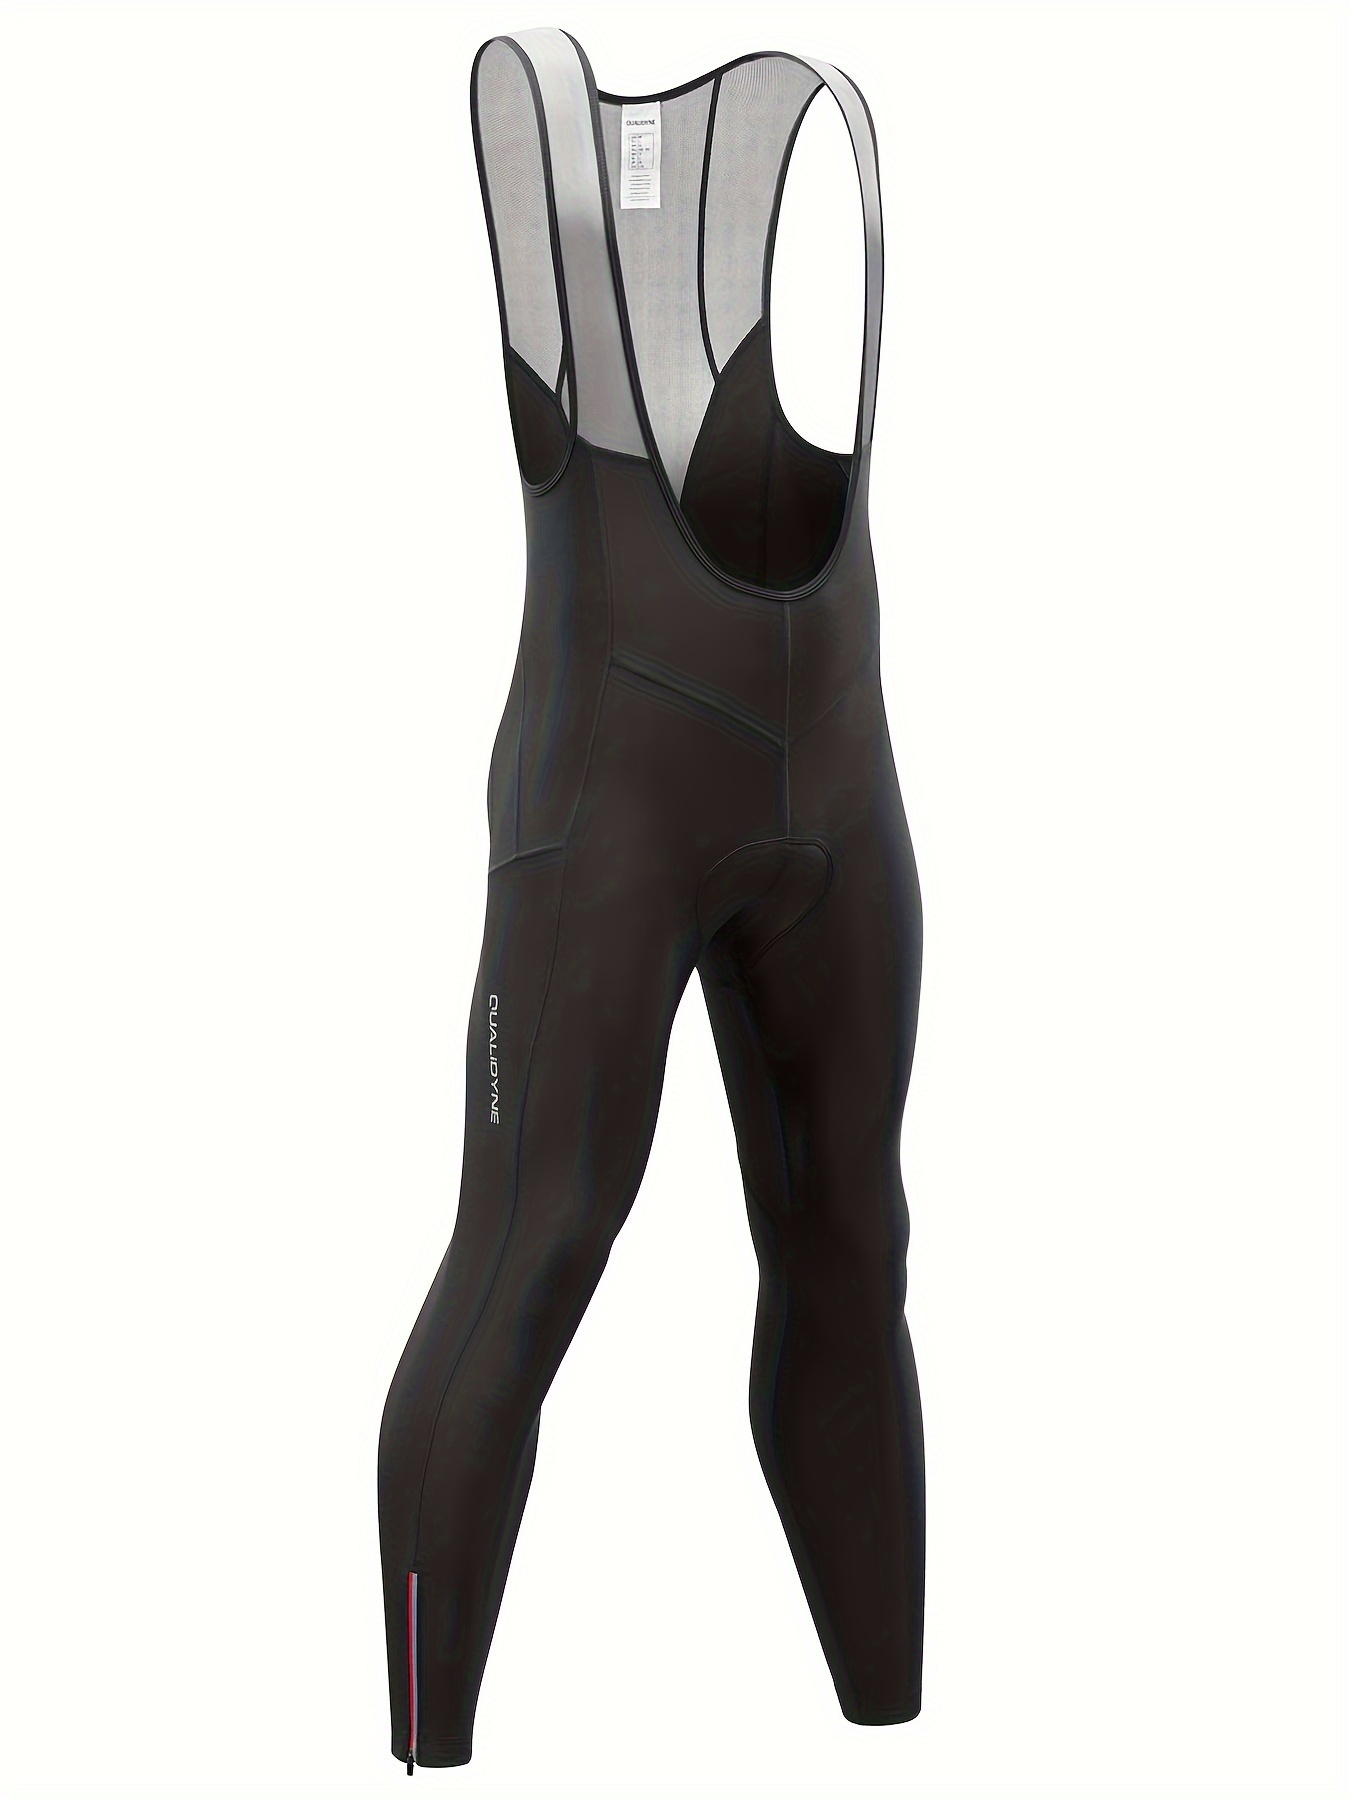 Winter Cycling Tights - Cold Weather Bike Tights